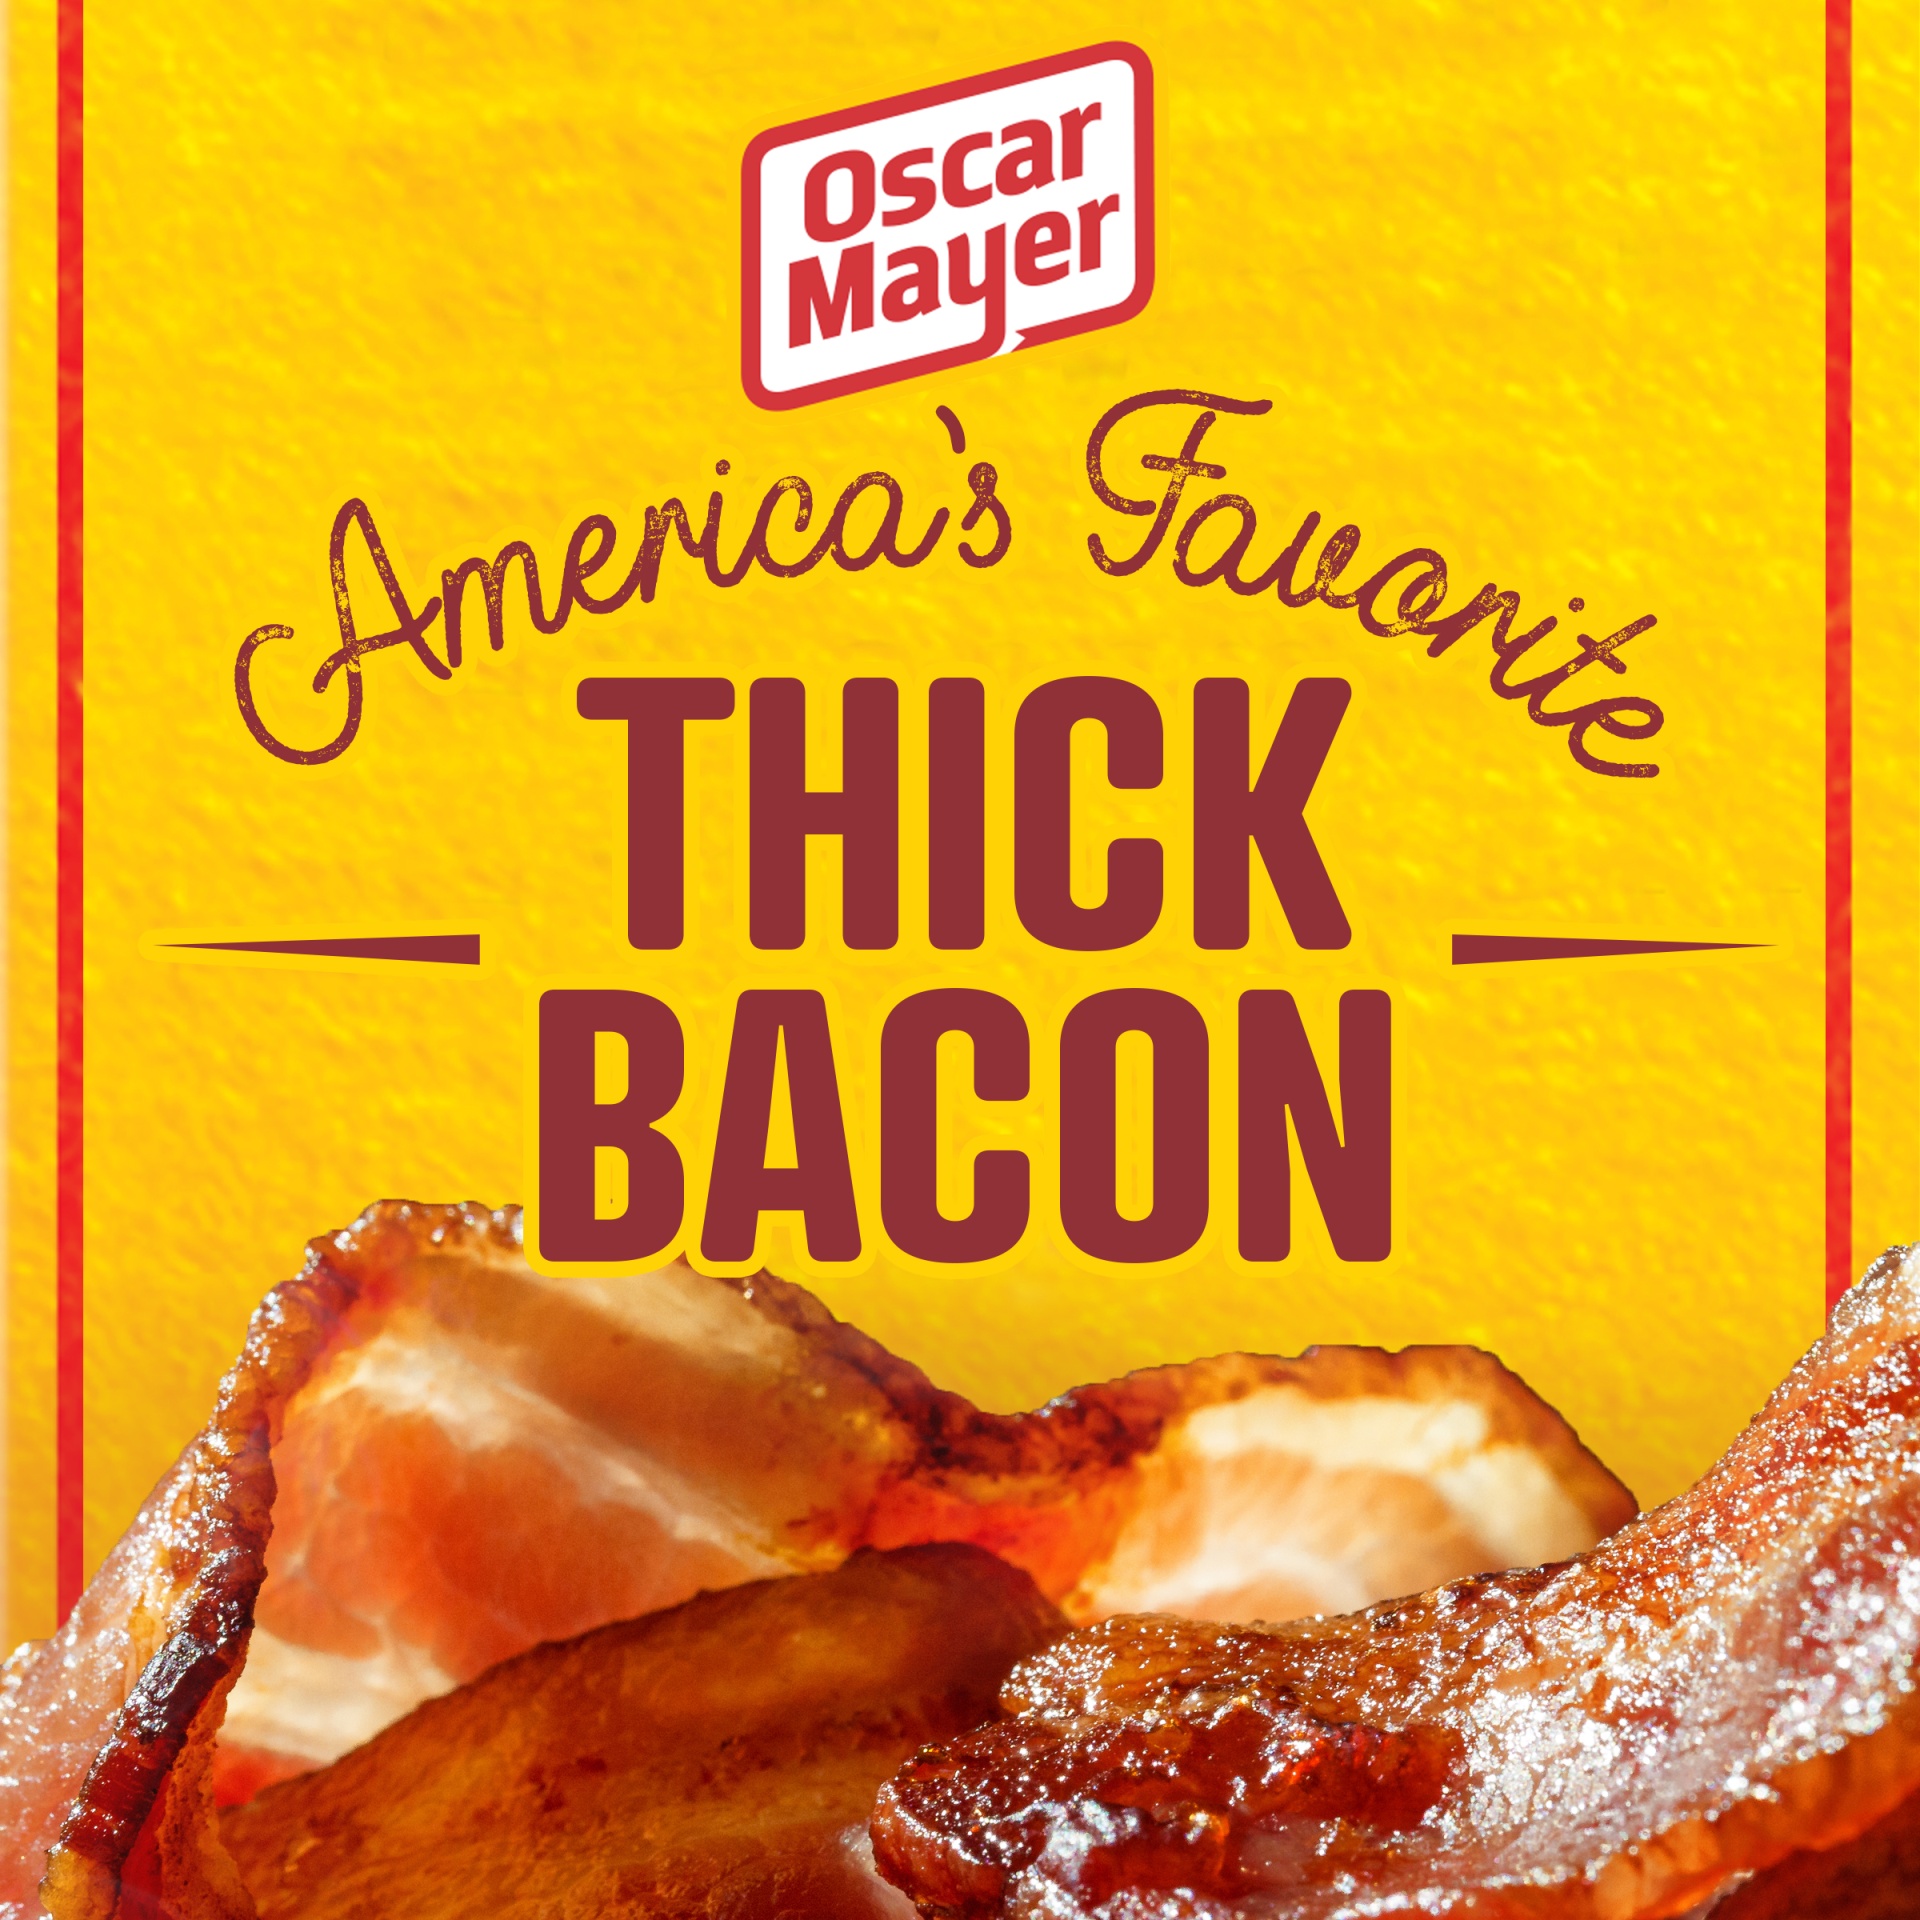 slide 6 of 12, Oscar Mayer Naturally Hardwood Smoked Thick Cut Bacon Pack, 11-13 slices, 16 oz